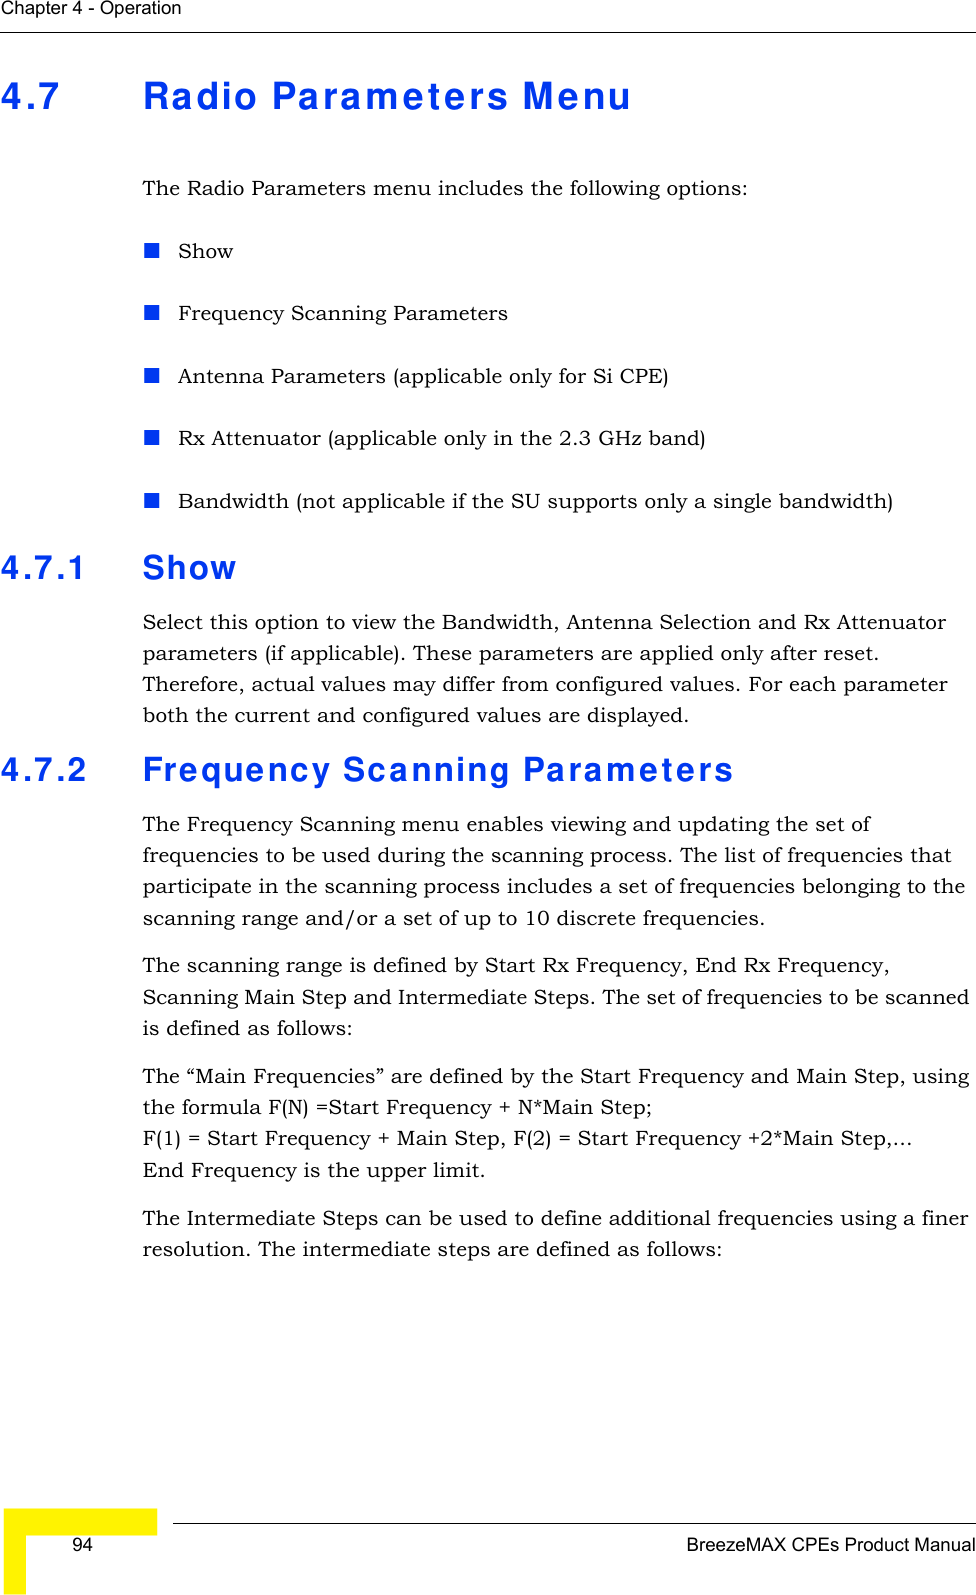  94 BreezeMAX CPEs Product ManualChapter 4 - Operation4.7 Radio Parameters MenuThe Radio Parameters menu includes the following options:ShowFrequency Scanning ParametersAntenna Parameters (applicable only for Si CPE)Rx Attenuator (applicable only in the 2.3 GHz band)Bandwidth (not applicable if the SU supports only a single bandwidth)4.7.1 Show Select this option to view the Bandwidth, Antenna Selection and Rx Attenuator parameters (if applicable). These parameters are applied only after reset. Therefore, actual values may differ from configured values. For each parameter both the current and configured values are displayed.4.7.2 Frequency Scanning ParametersThe Frequency Scanning menu enables viewing and updating the set of frequencies to be used during the scanning process. The list of frequencies that participate in the scanning process includes a set of frequencies belonging to the scanning range and/or a set of up to 10 discrete frequencies. The scanning range is defined by Start Rx Frequency, End Rx Frequency, Scanning Main Step and Intermediate Steps. The set of frequencies to be scanned is defined as follows:The “Main Frequencies” are defined by the Start Frequency and Main Step, using the formula F(N) =Start Frequency + N*Main Step;  F(1) = Start Frequency + Main Step, F(2) = Start Frequency +2*Main Step,... End Frequency is the upper limit.The Intermediate Steps can be used to define additional frequencies using a finer resolution. The intermediate steps are defined as follows: